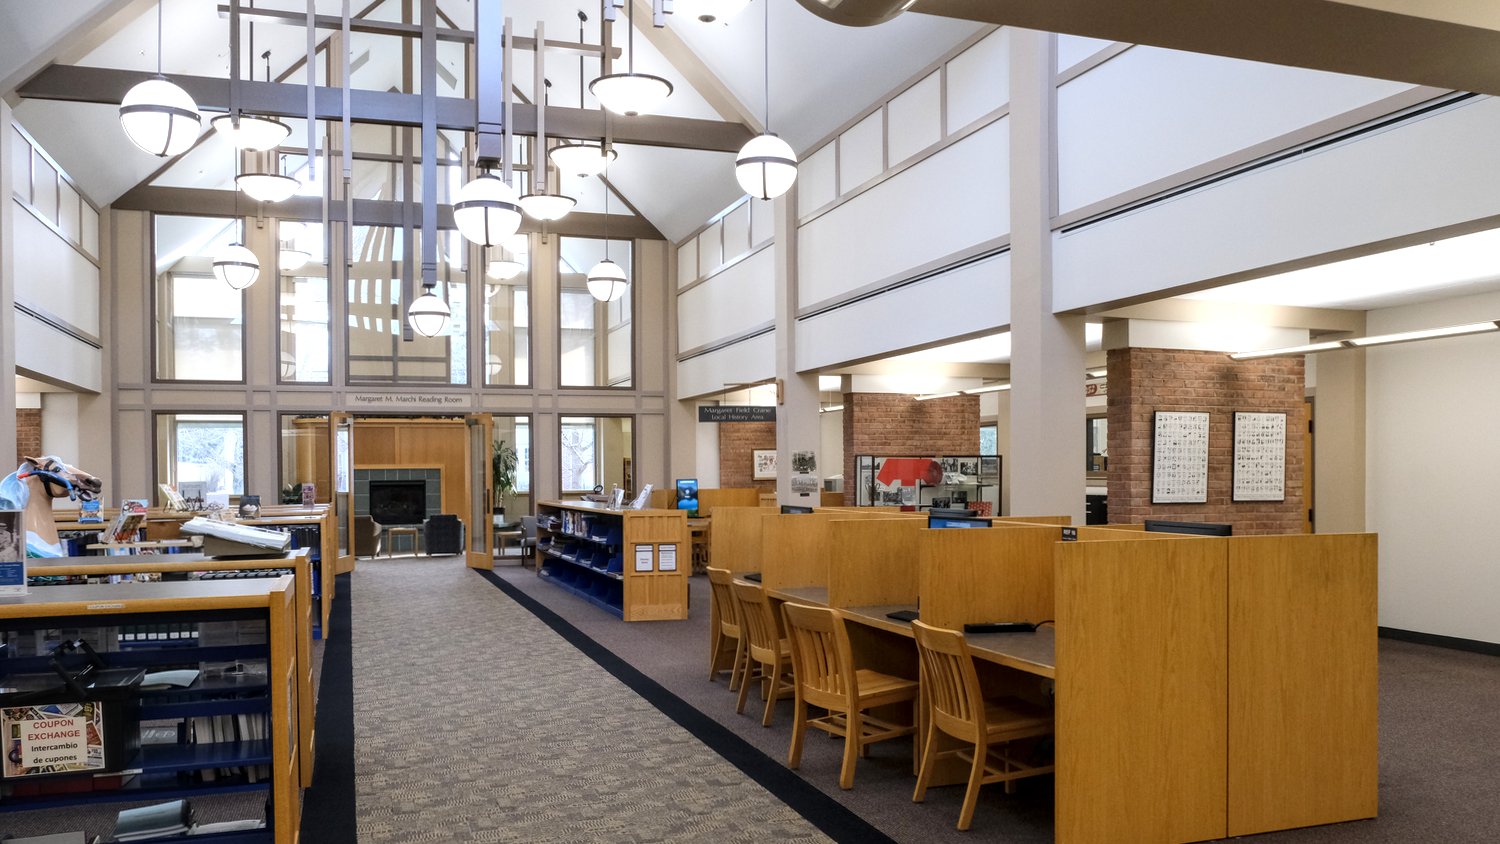 Large open space in the library.